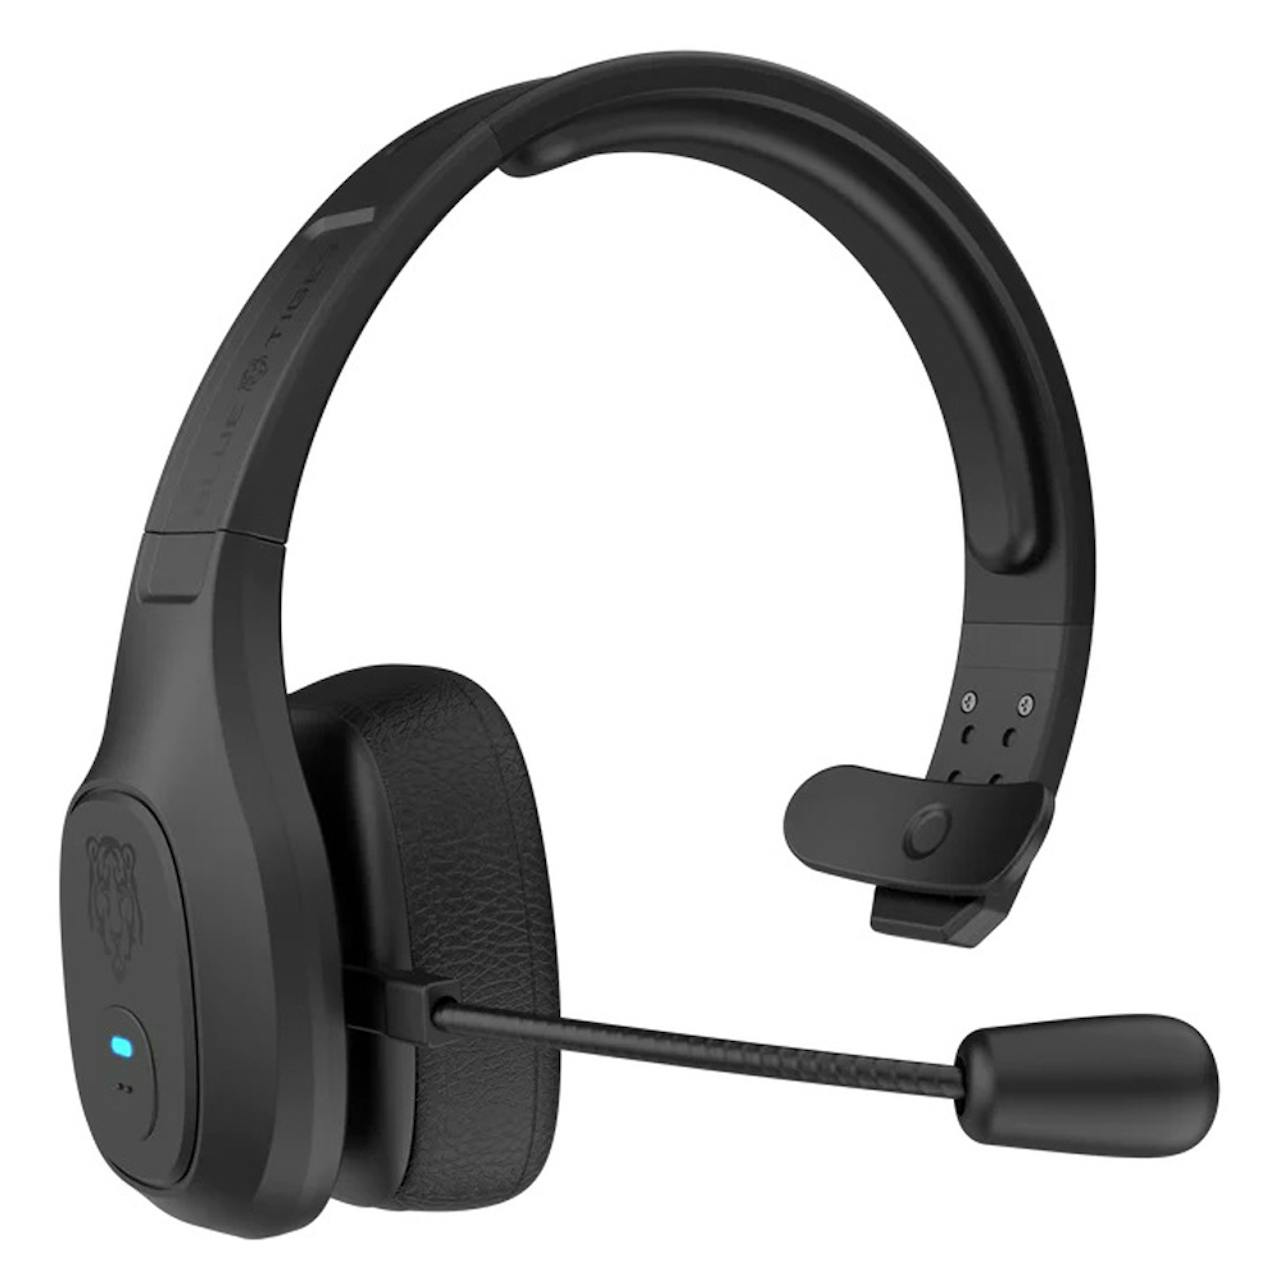 https://raneys-cdn11.imgix.net/images/stencil/original/products/209671/199396/23883-Storm-Headset-in-Black-Tilted__92862.1685454847.jpg?auto=compress,format&w=1280